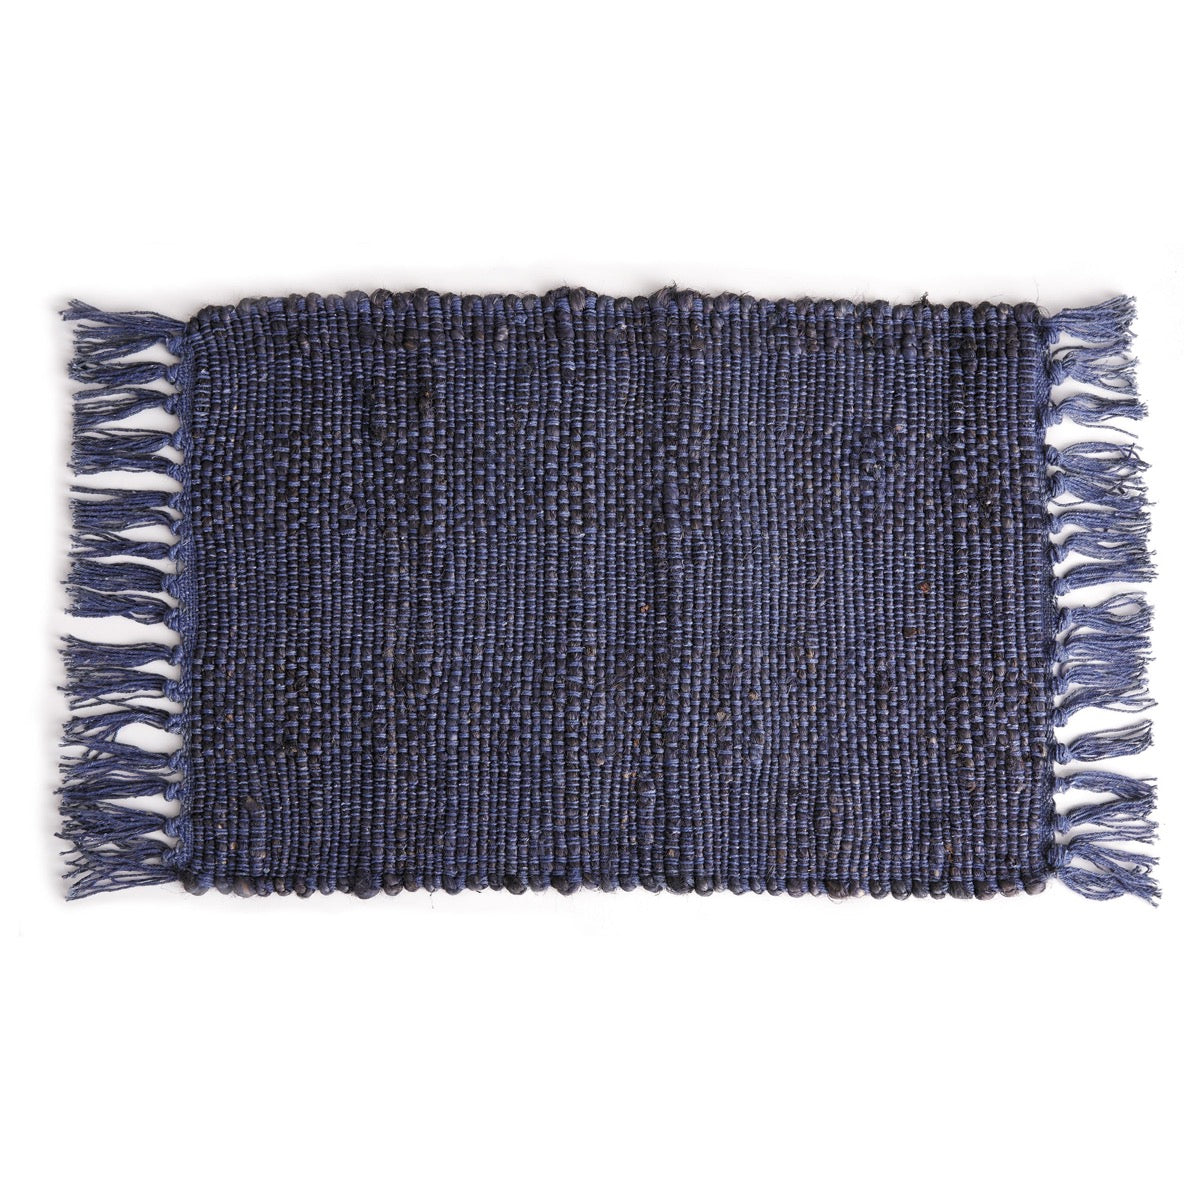 Woven Fringe Placement - Navy. Top view.